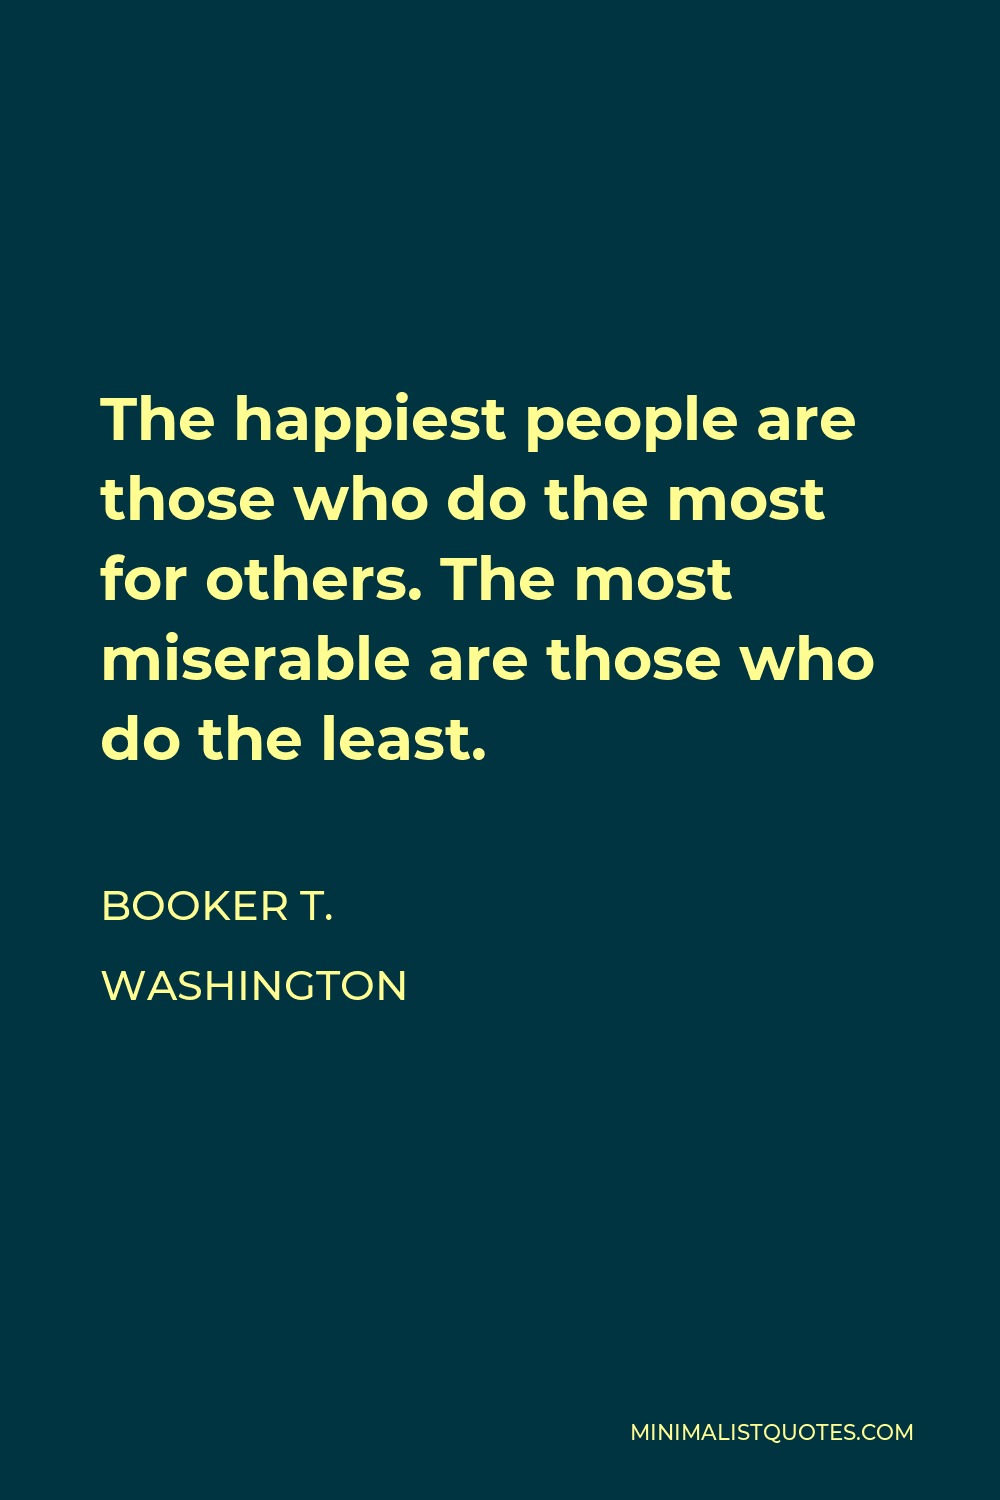 Booker T. Washington Quote - The happiest people are those who do the most for others. The most miserable are those who do the least.